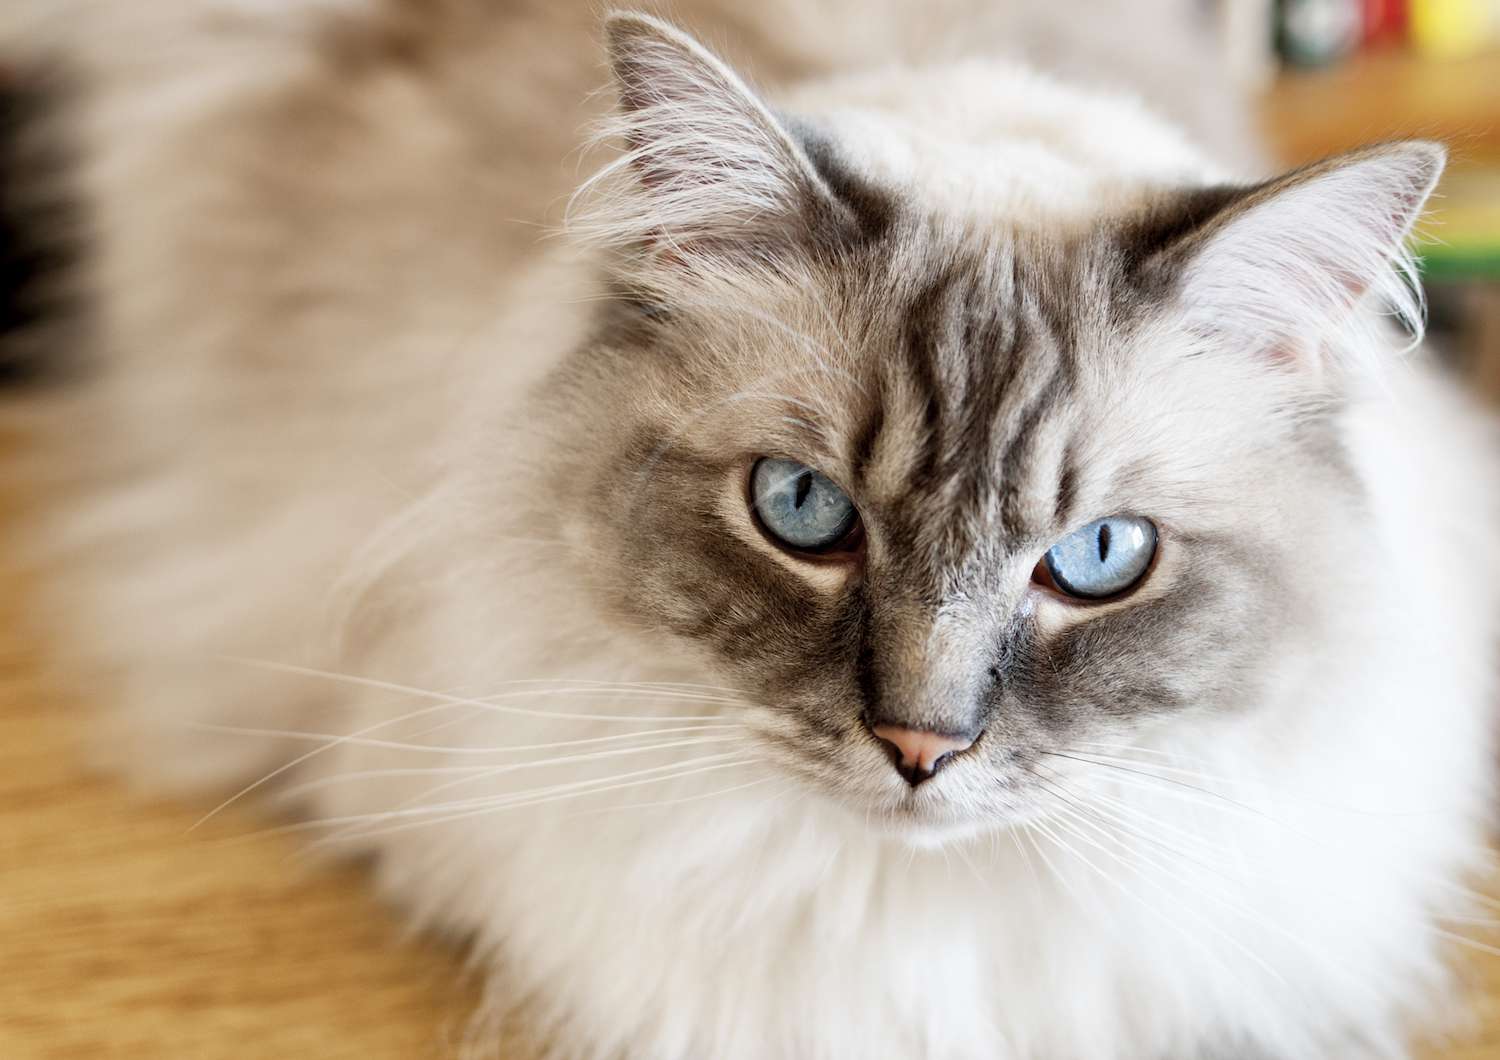 ragdoll cat looking up with bright blue eyes